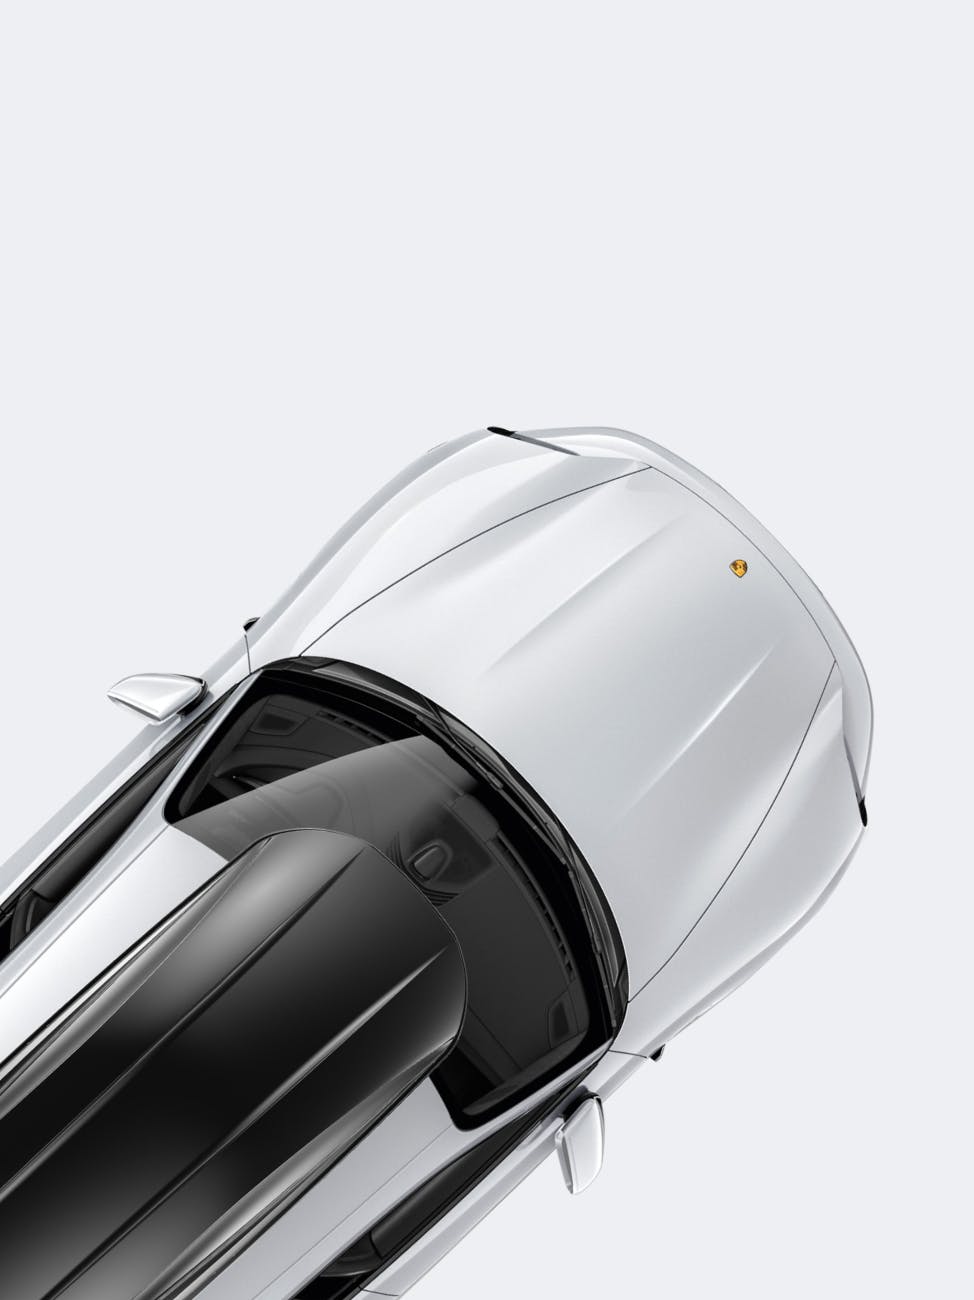 A silver Porsche car pictured from above on a white background.